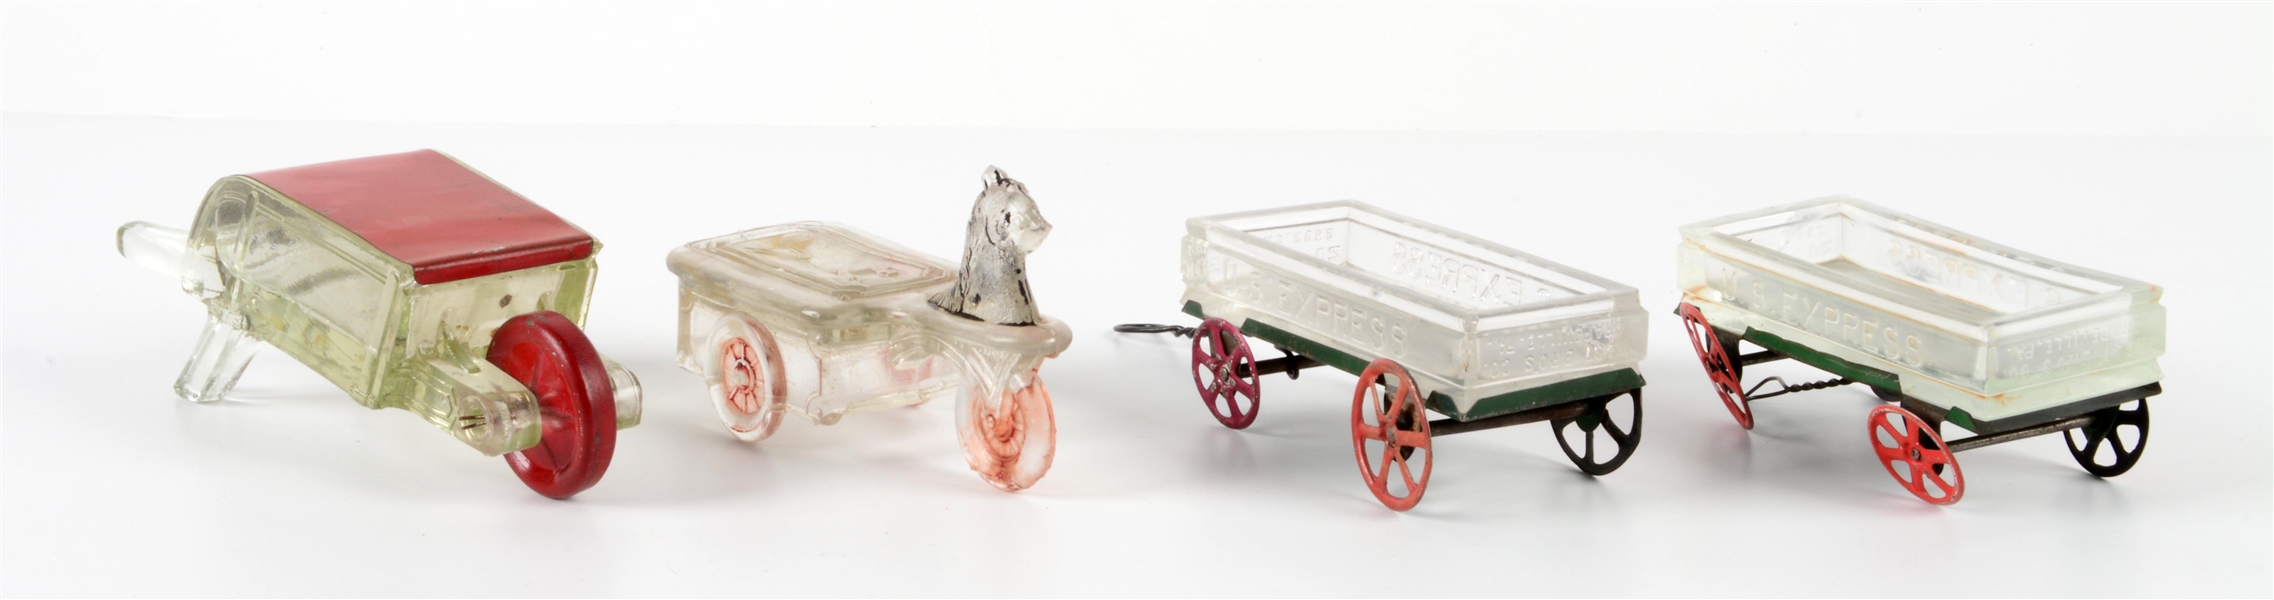 LOT OF 4: VINTAGE GLASS WAGON & WHEELBARROW CANDY CONTAINERS.